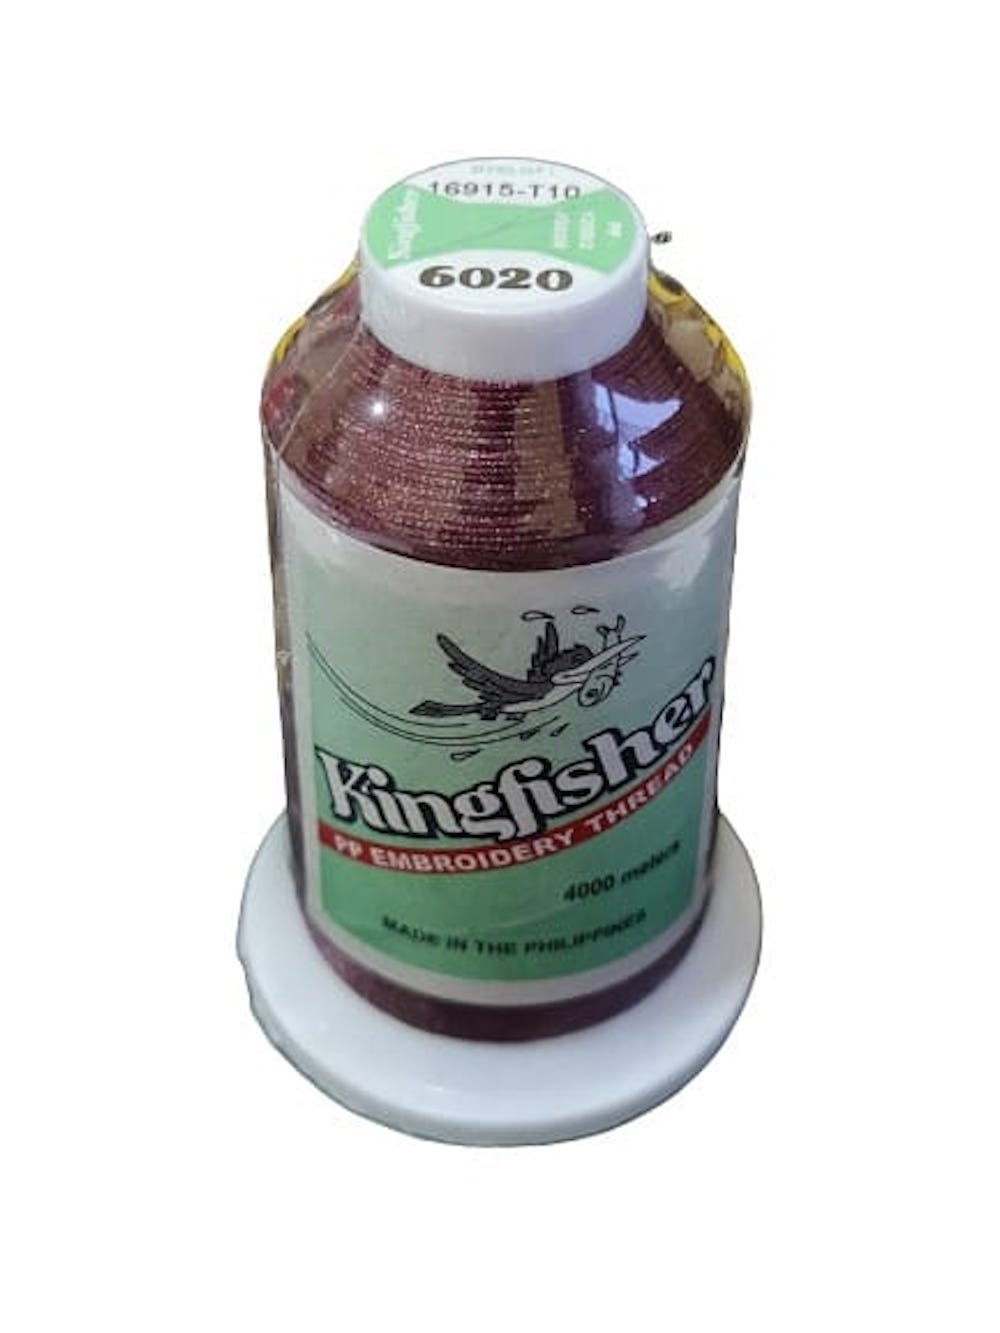 King Fisher Embroidery Thread 4000m 6020 - MY SEWING MALL